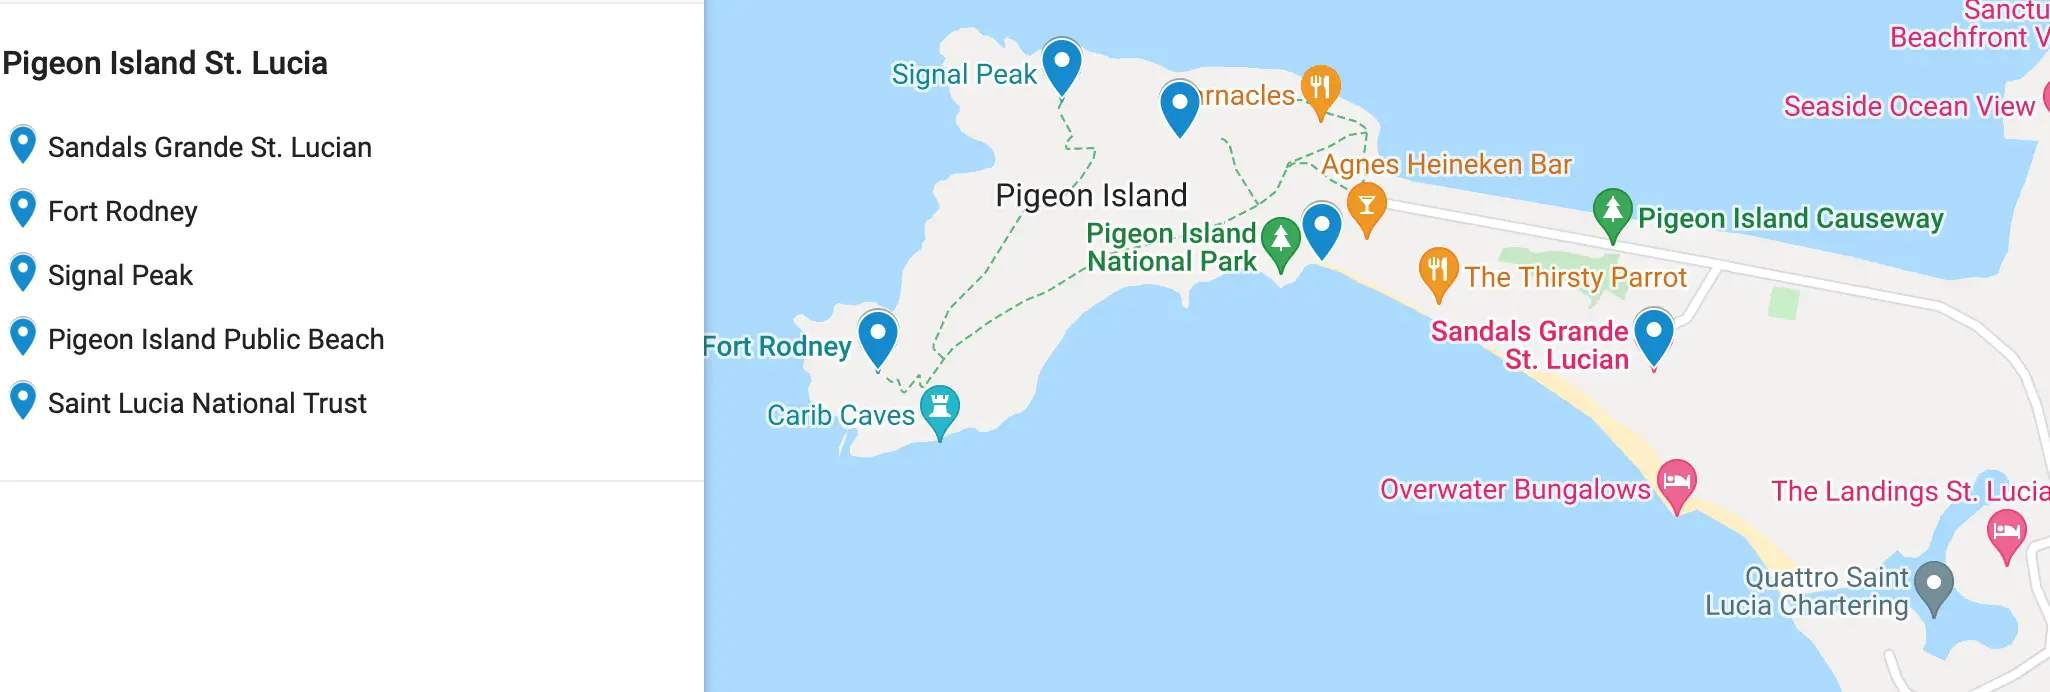 Map of Pigeon Island St Lucia and its visitor attractions